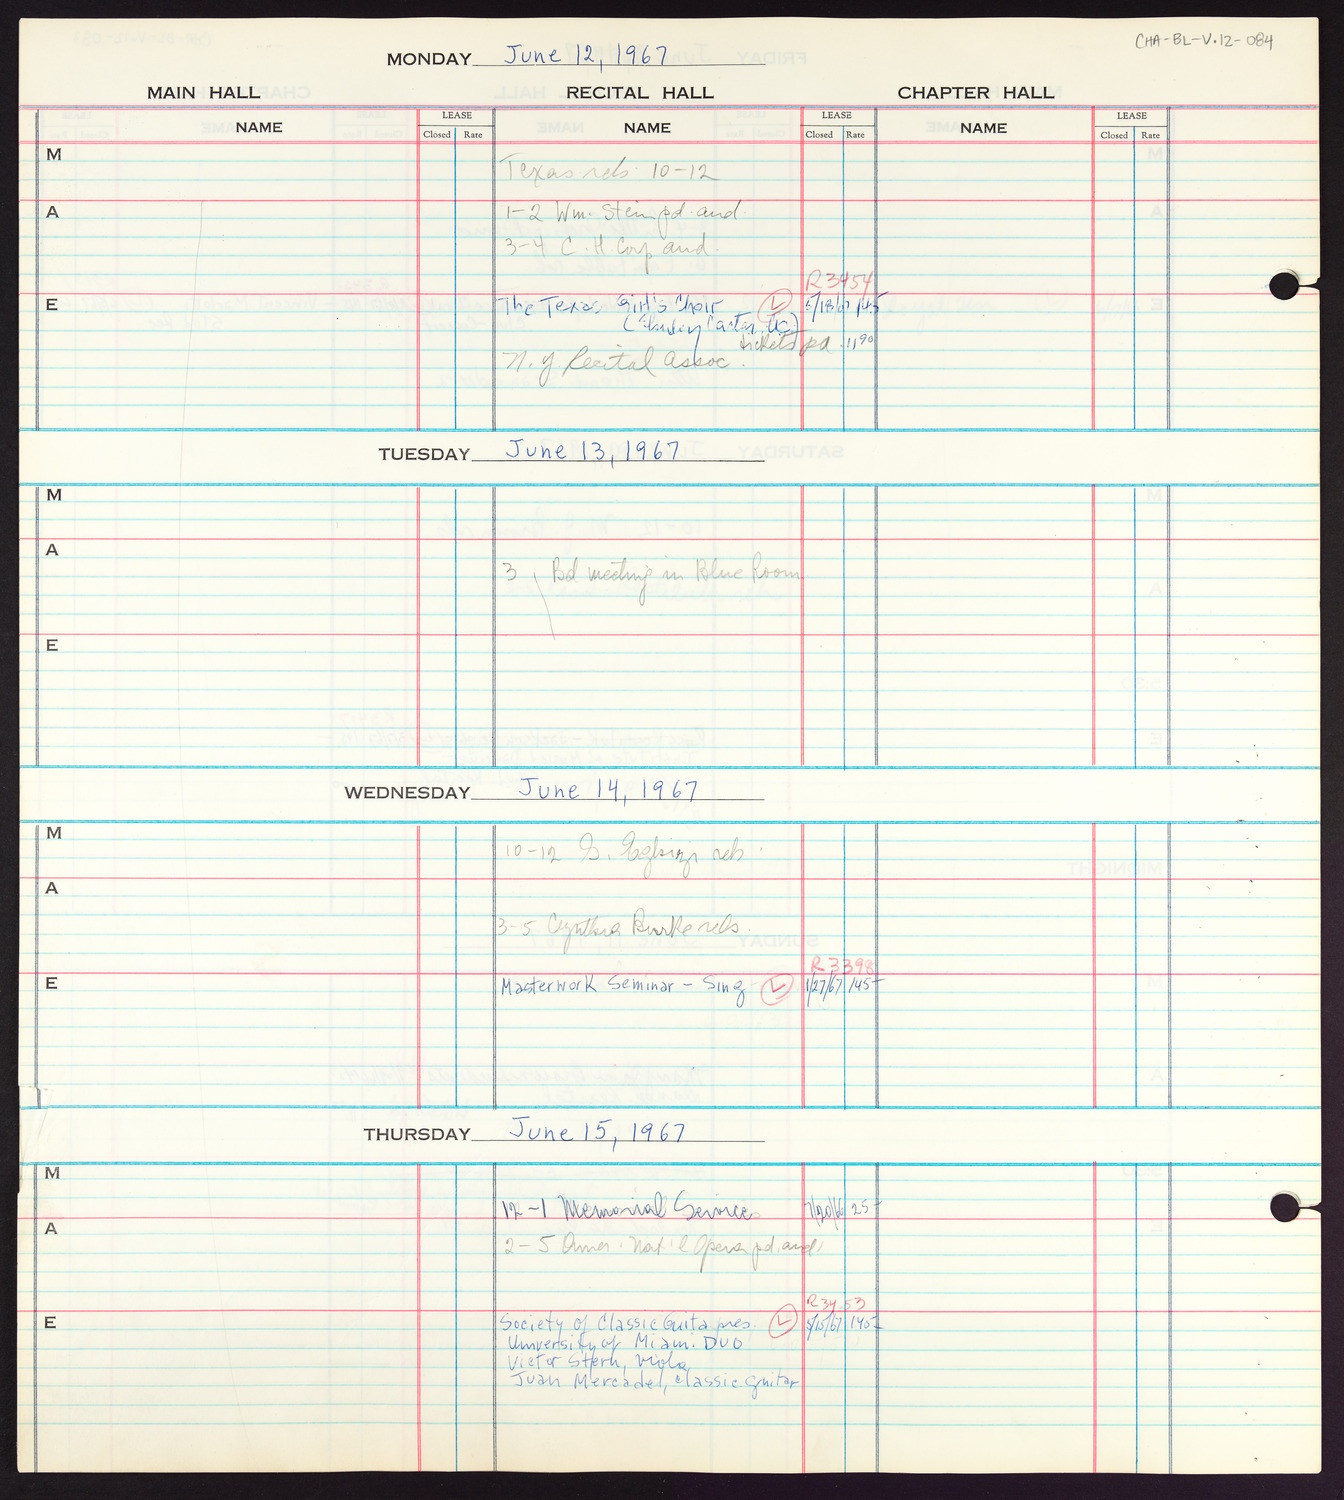 Carnegie Hall Booking Ledger, volume 12, page 84